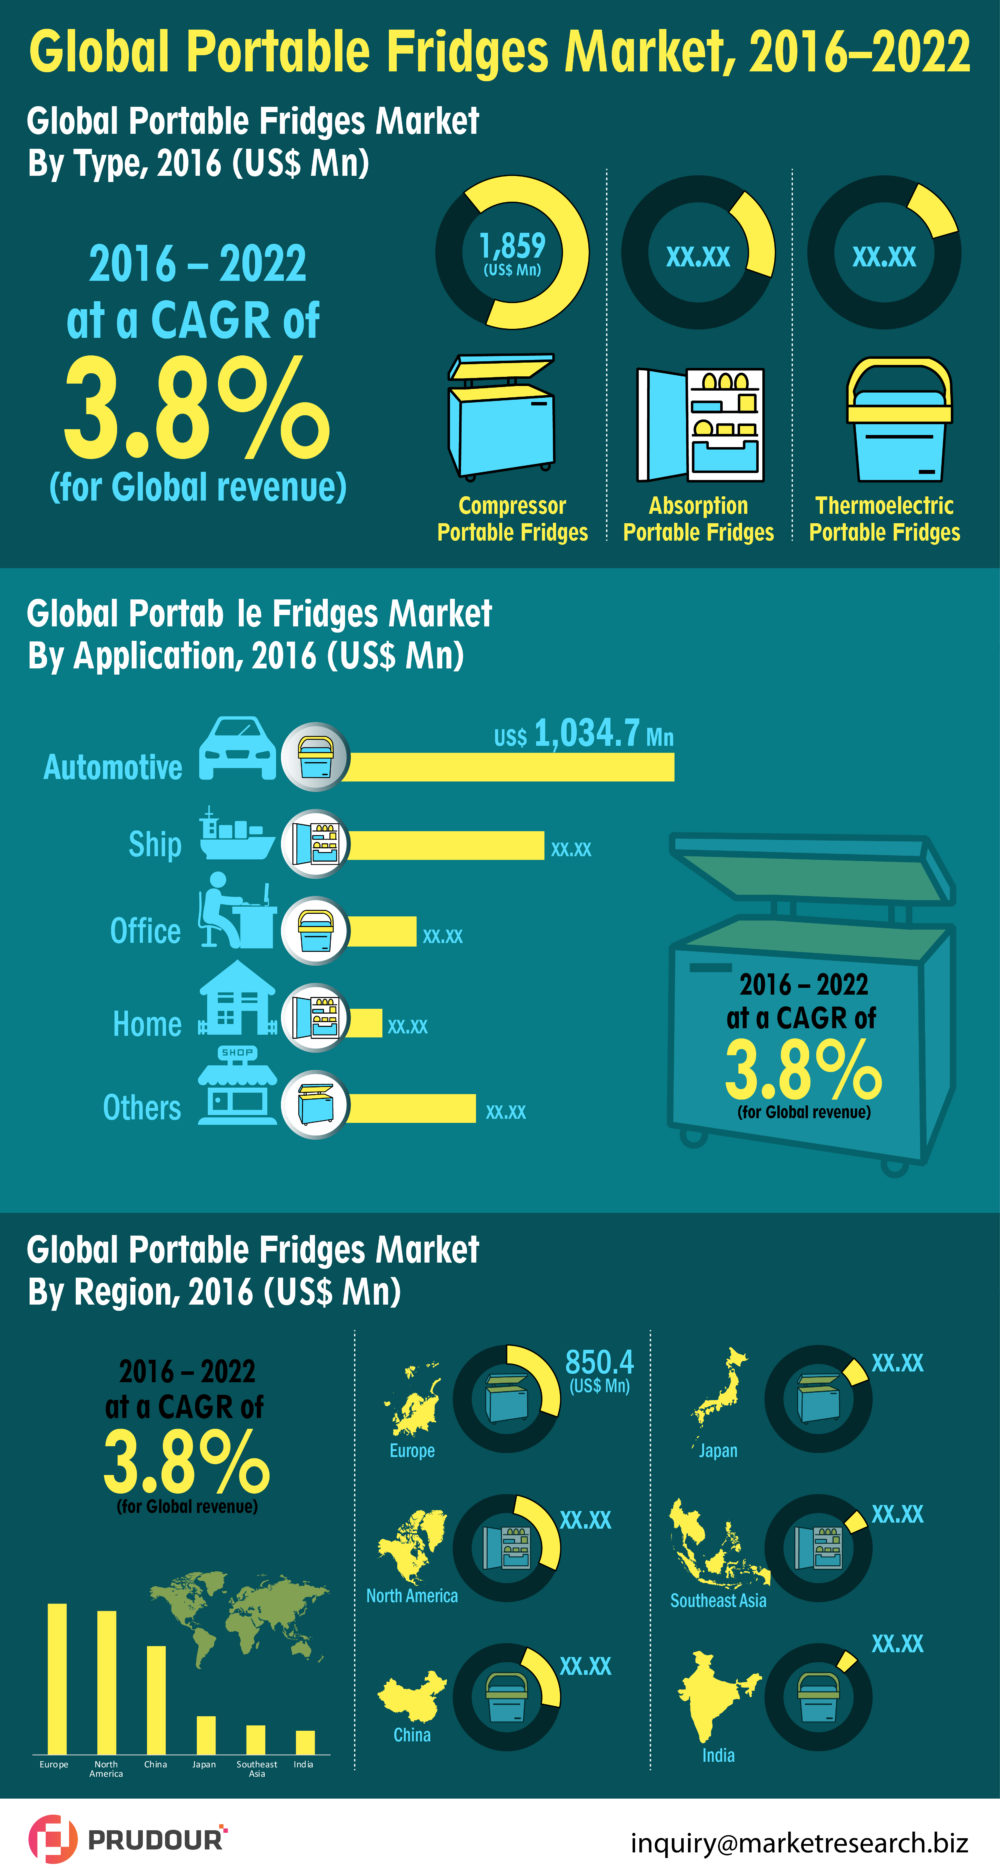 2026 US$ 3,480.7 Mn: Global Portable Fridges Market is expected to reach US$ 3,480.7 Mn in 2026